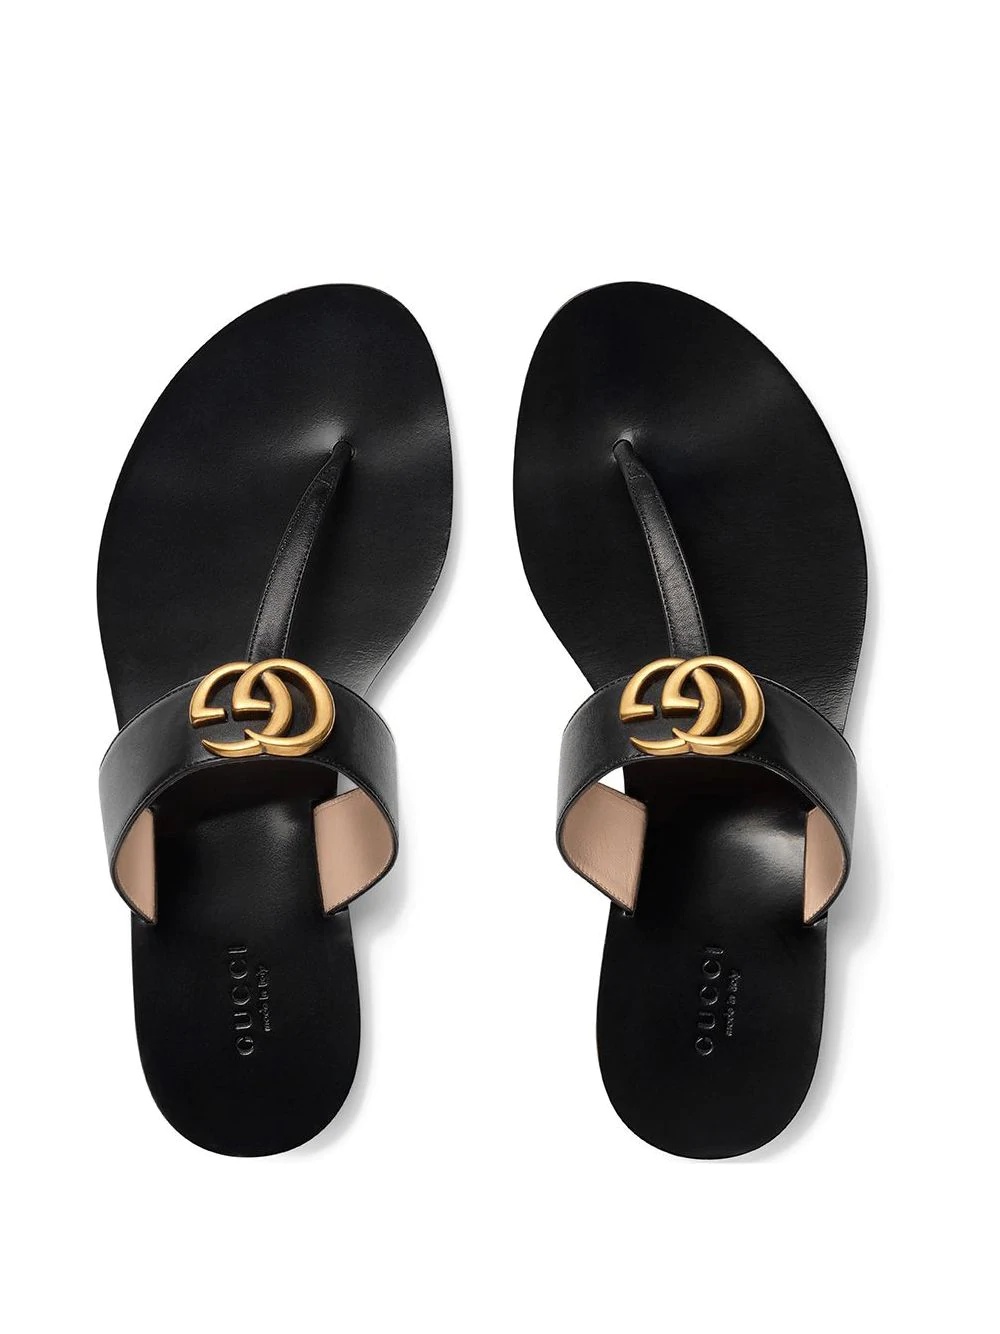 Double G leather thong sandals - 5